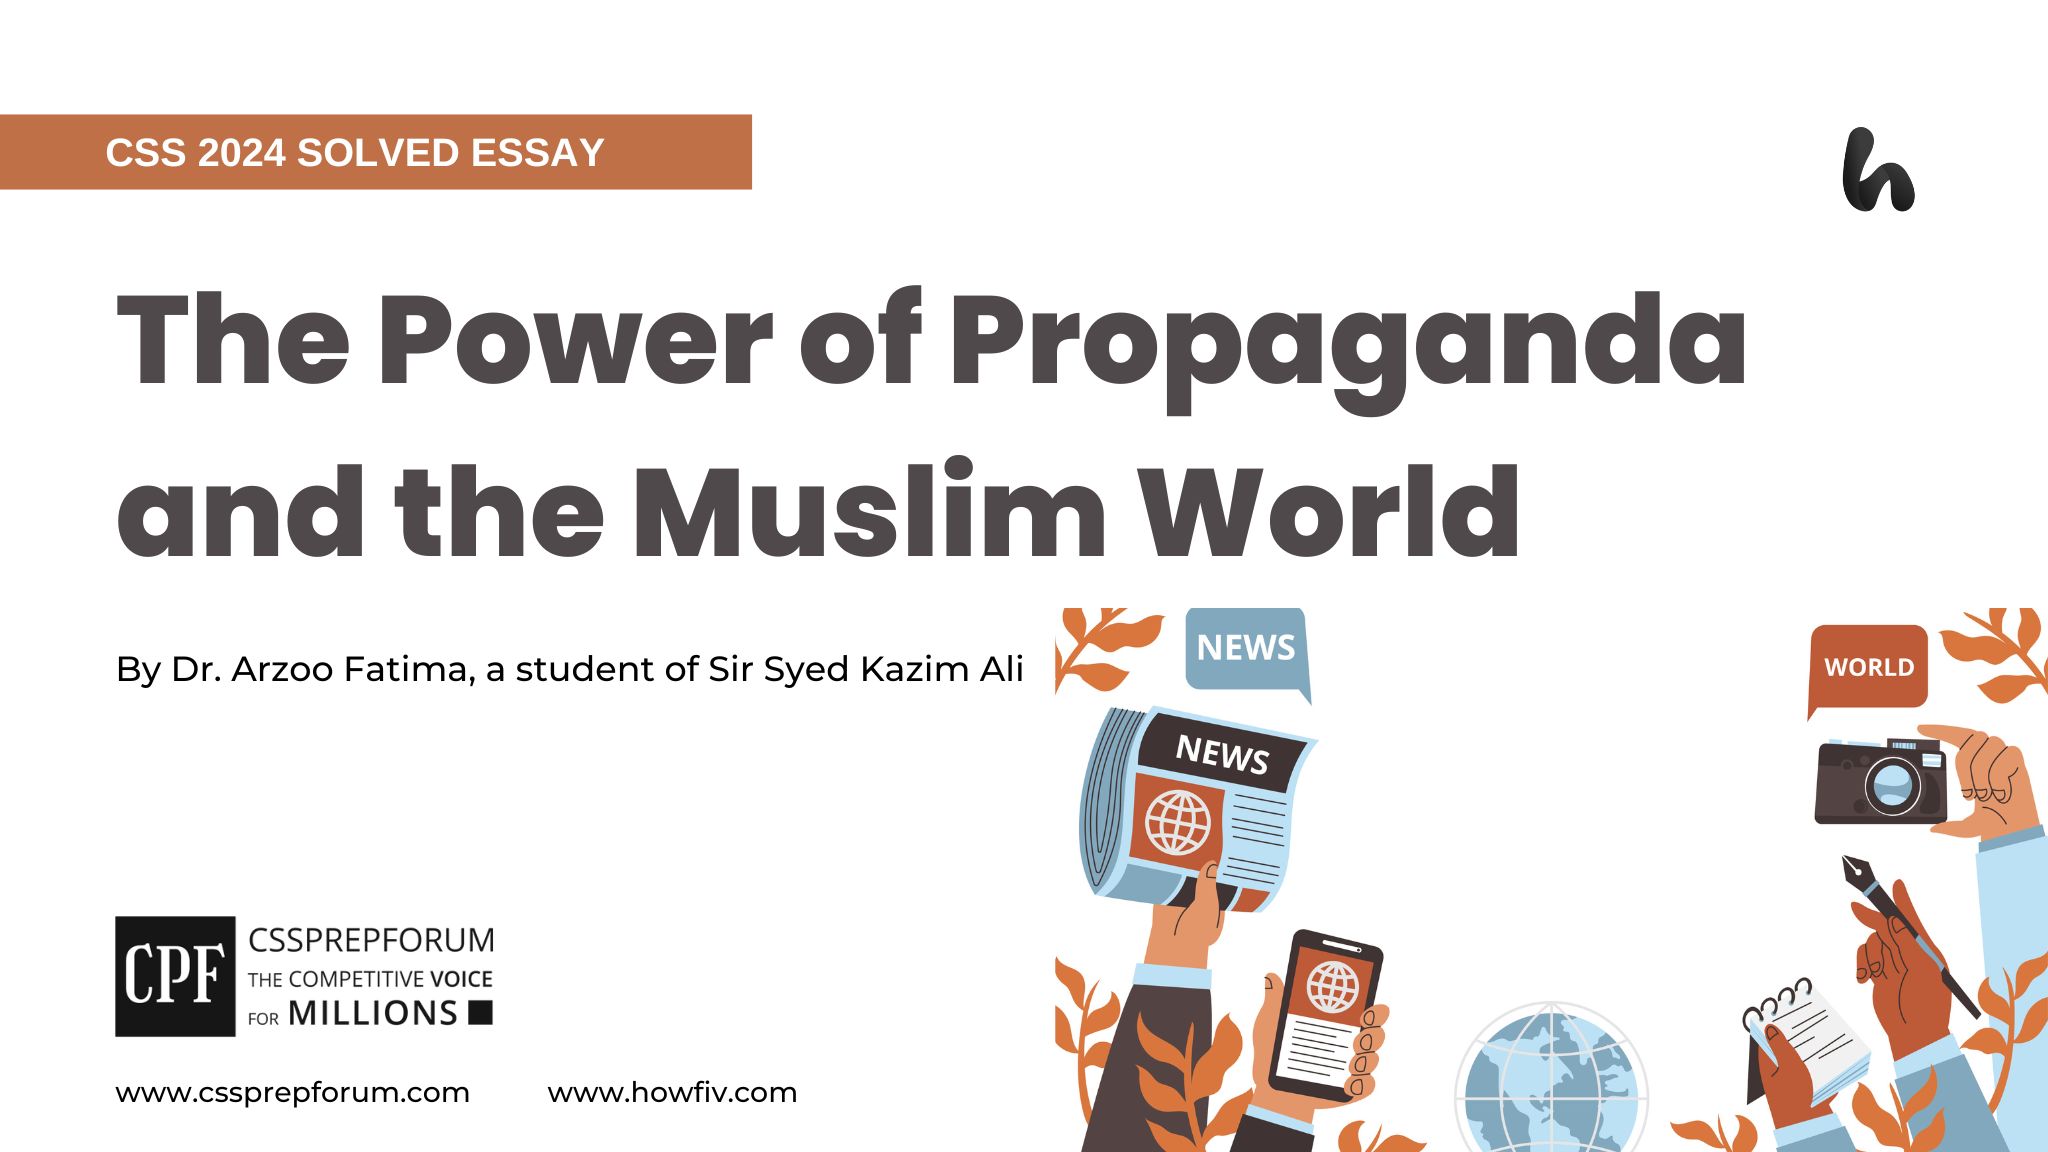 The Power of Propaganda and the Muslim World by Dr. Arzoo Fatima